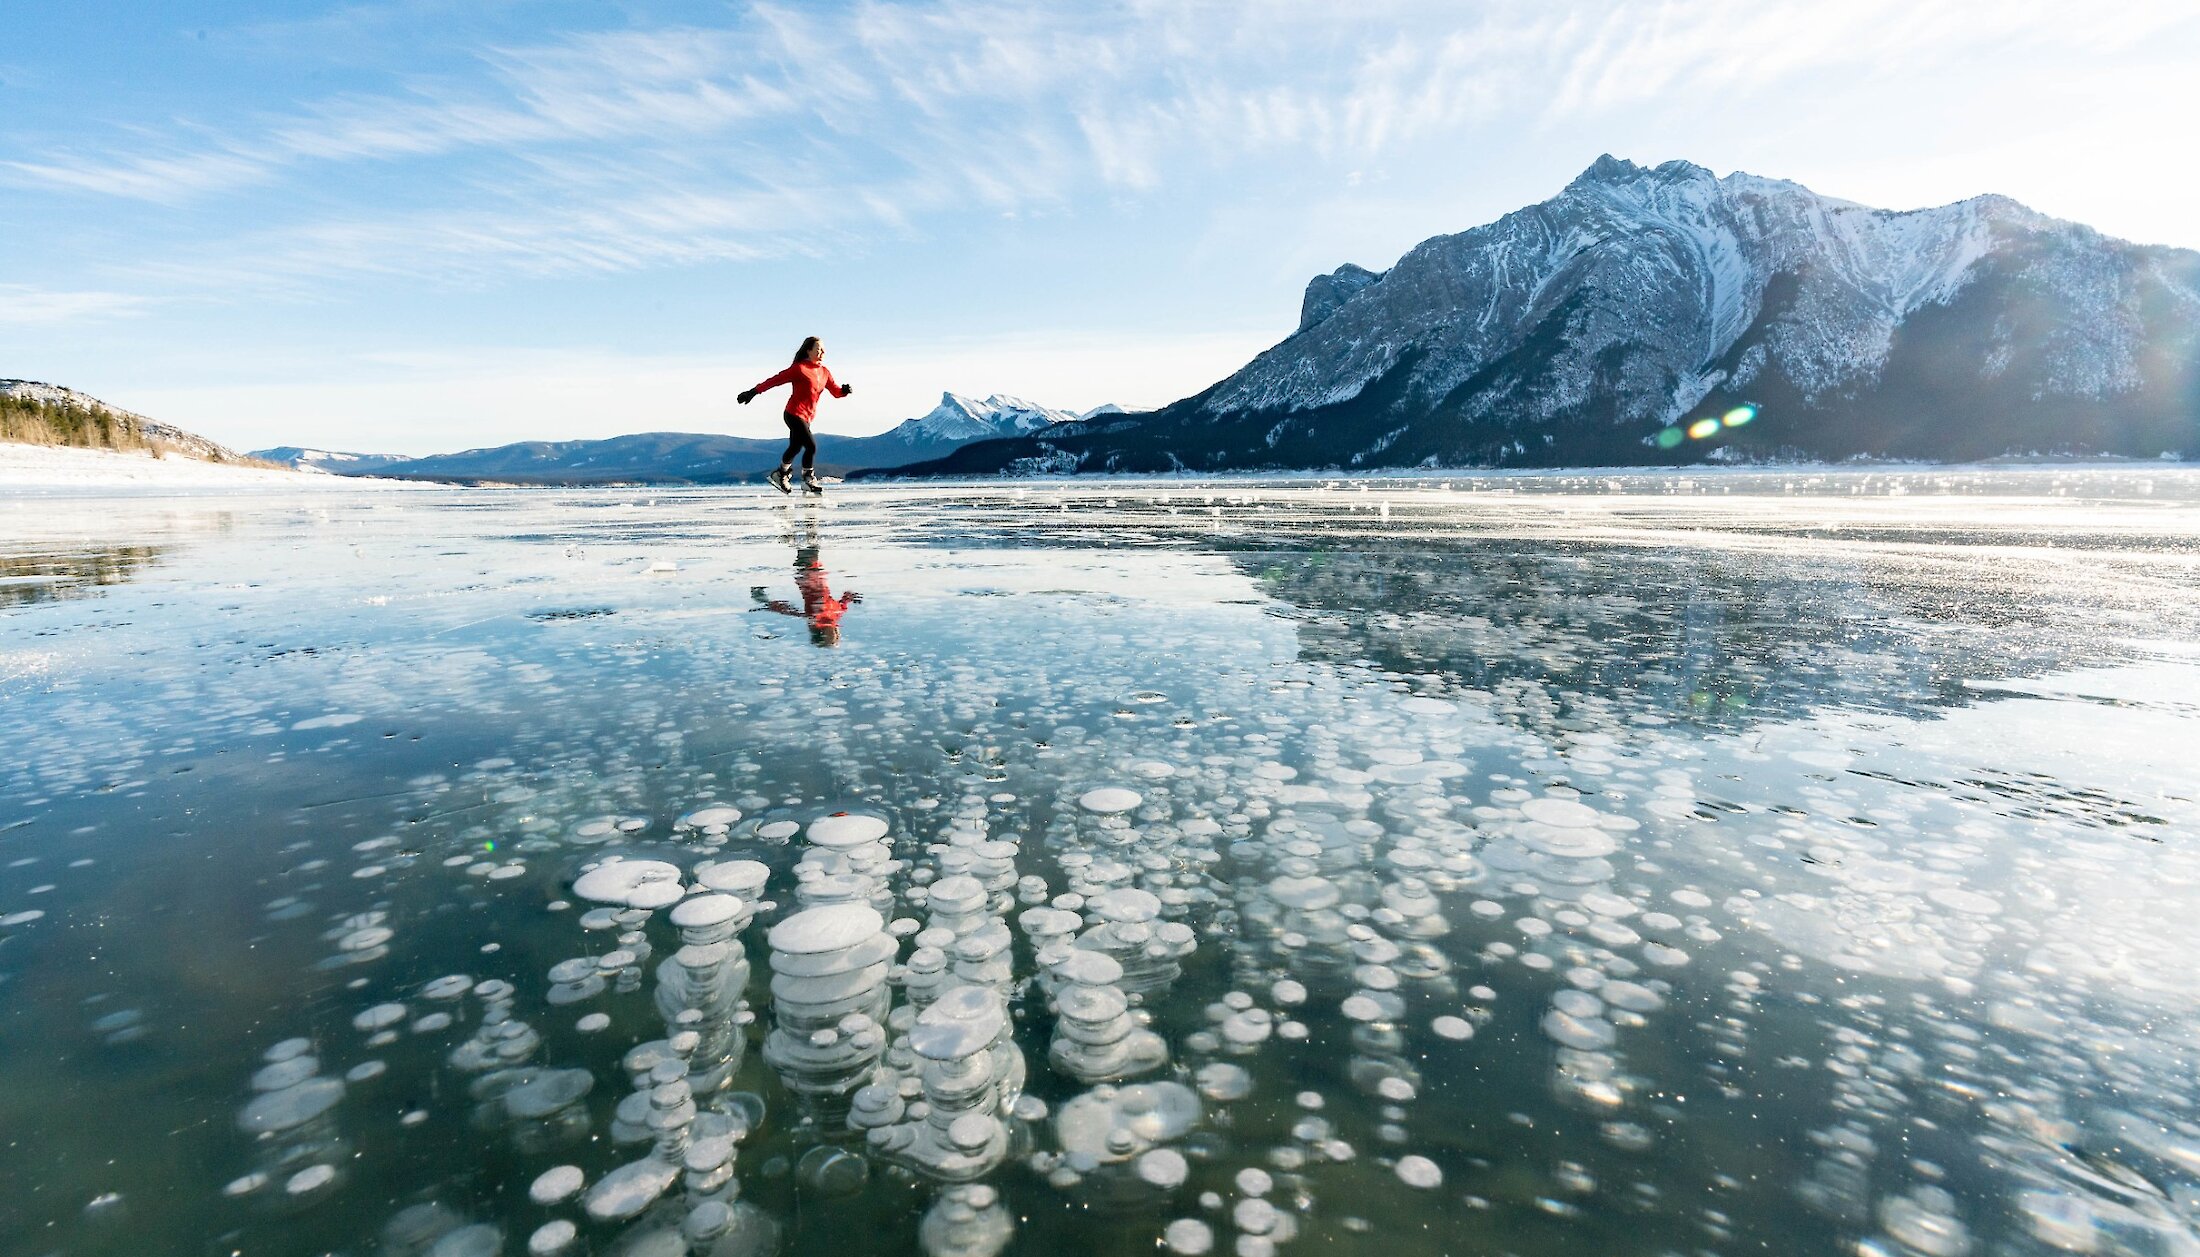 Ice skating over the ice bubbles on Abraham Lake in Alberta